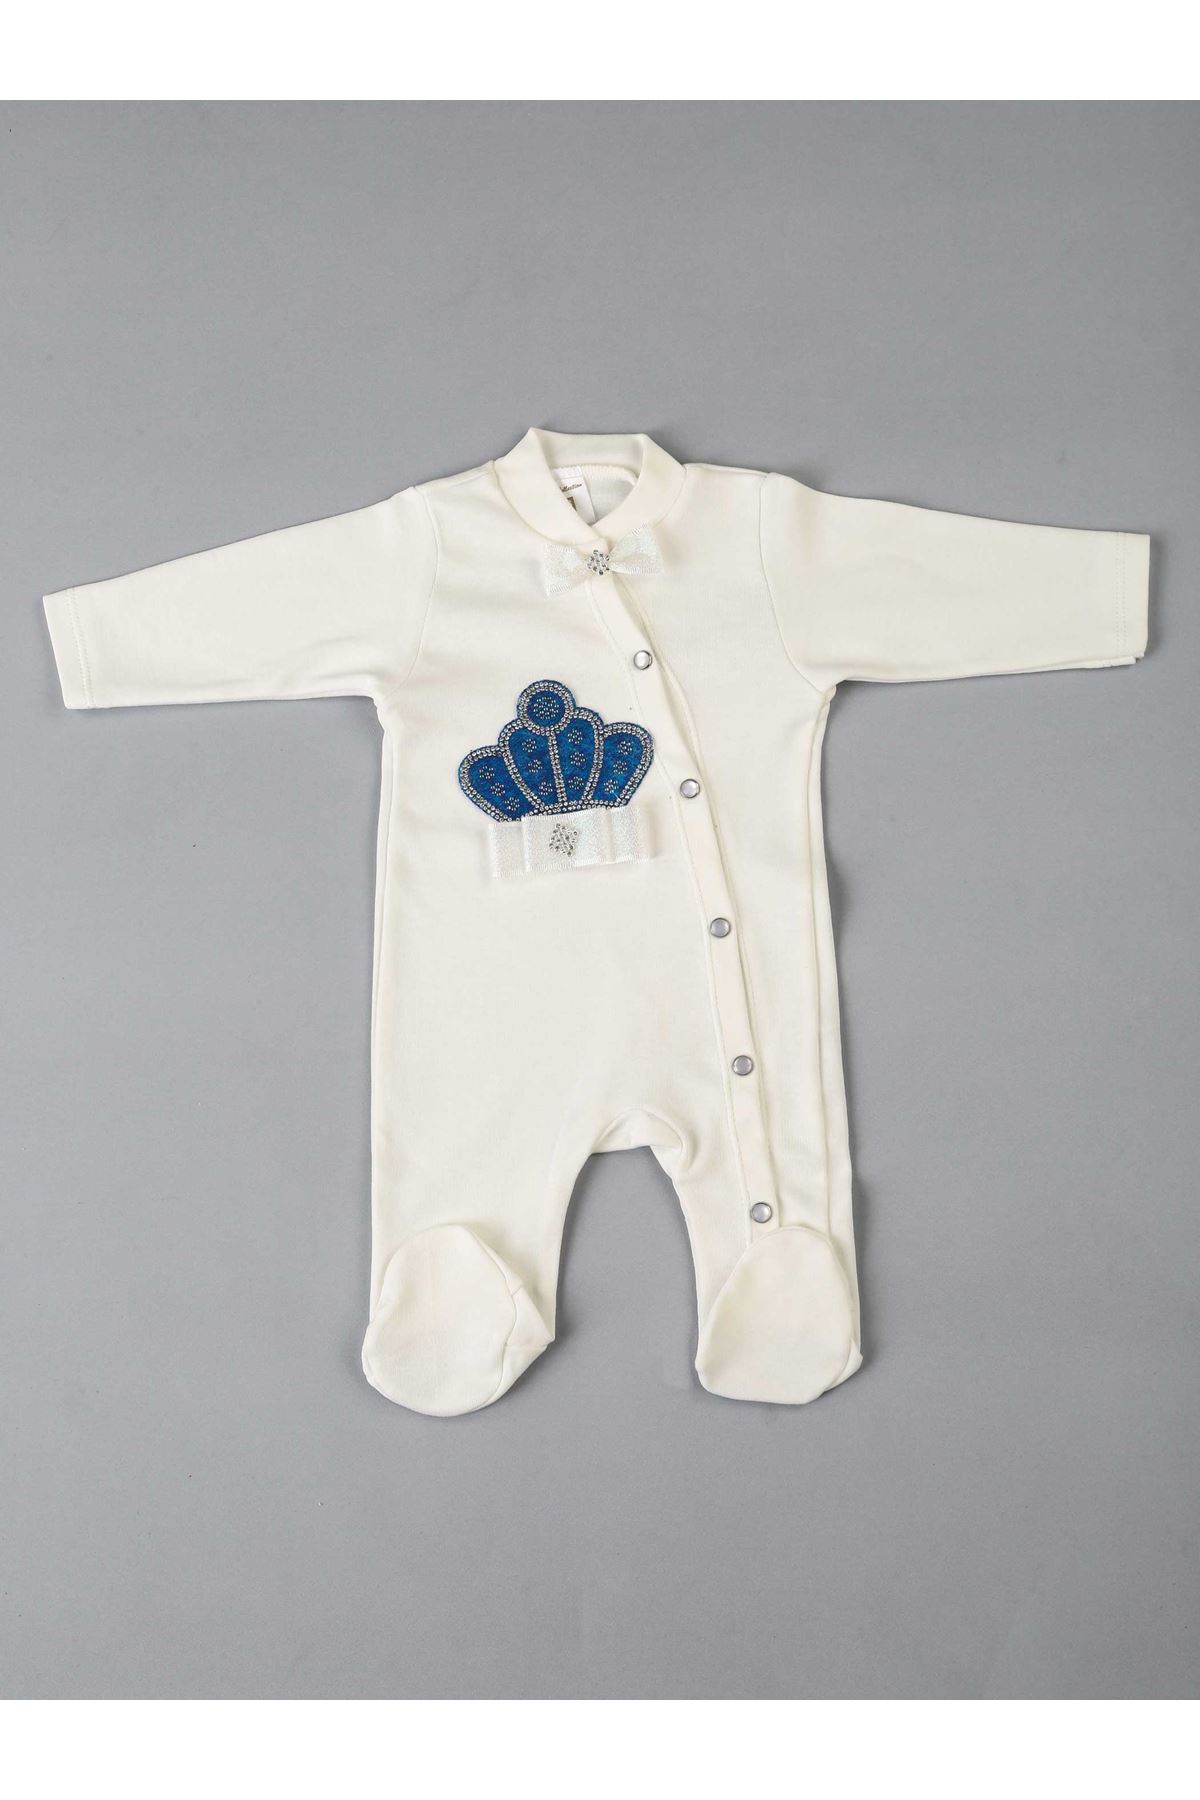 Navy blue King Crowned Male Baby 5 Piece Jumpsuit Set